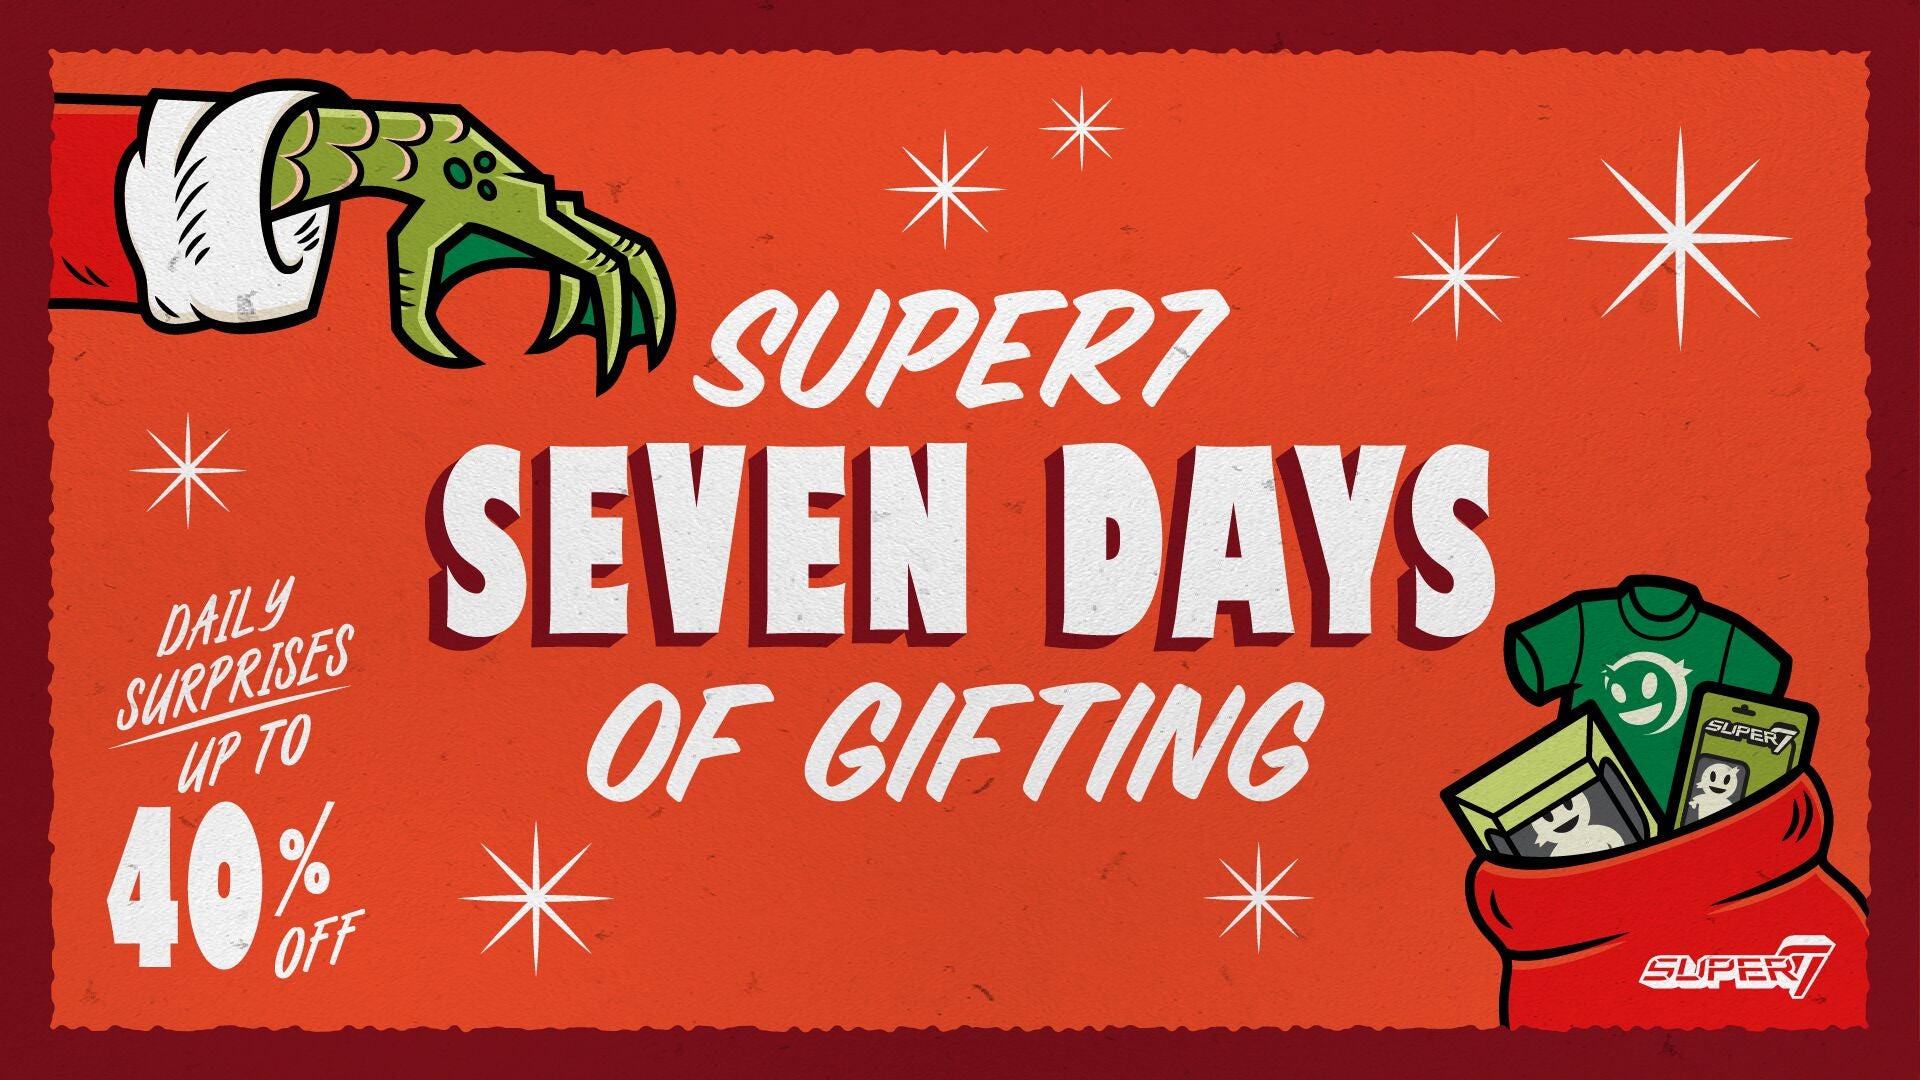 Super7 Days of Gifting